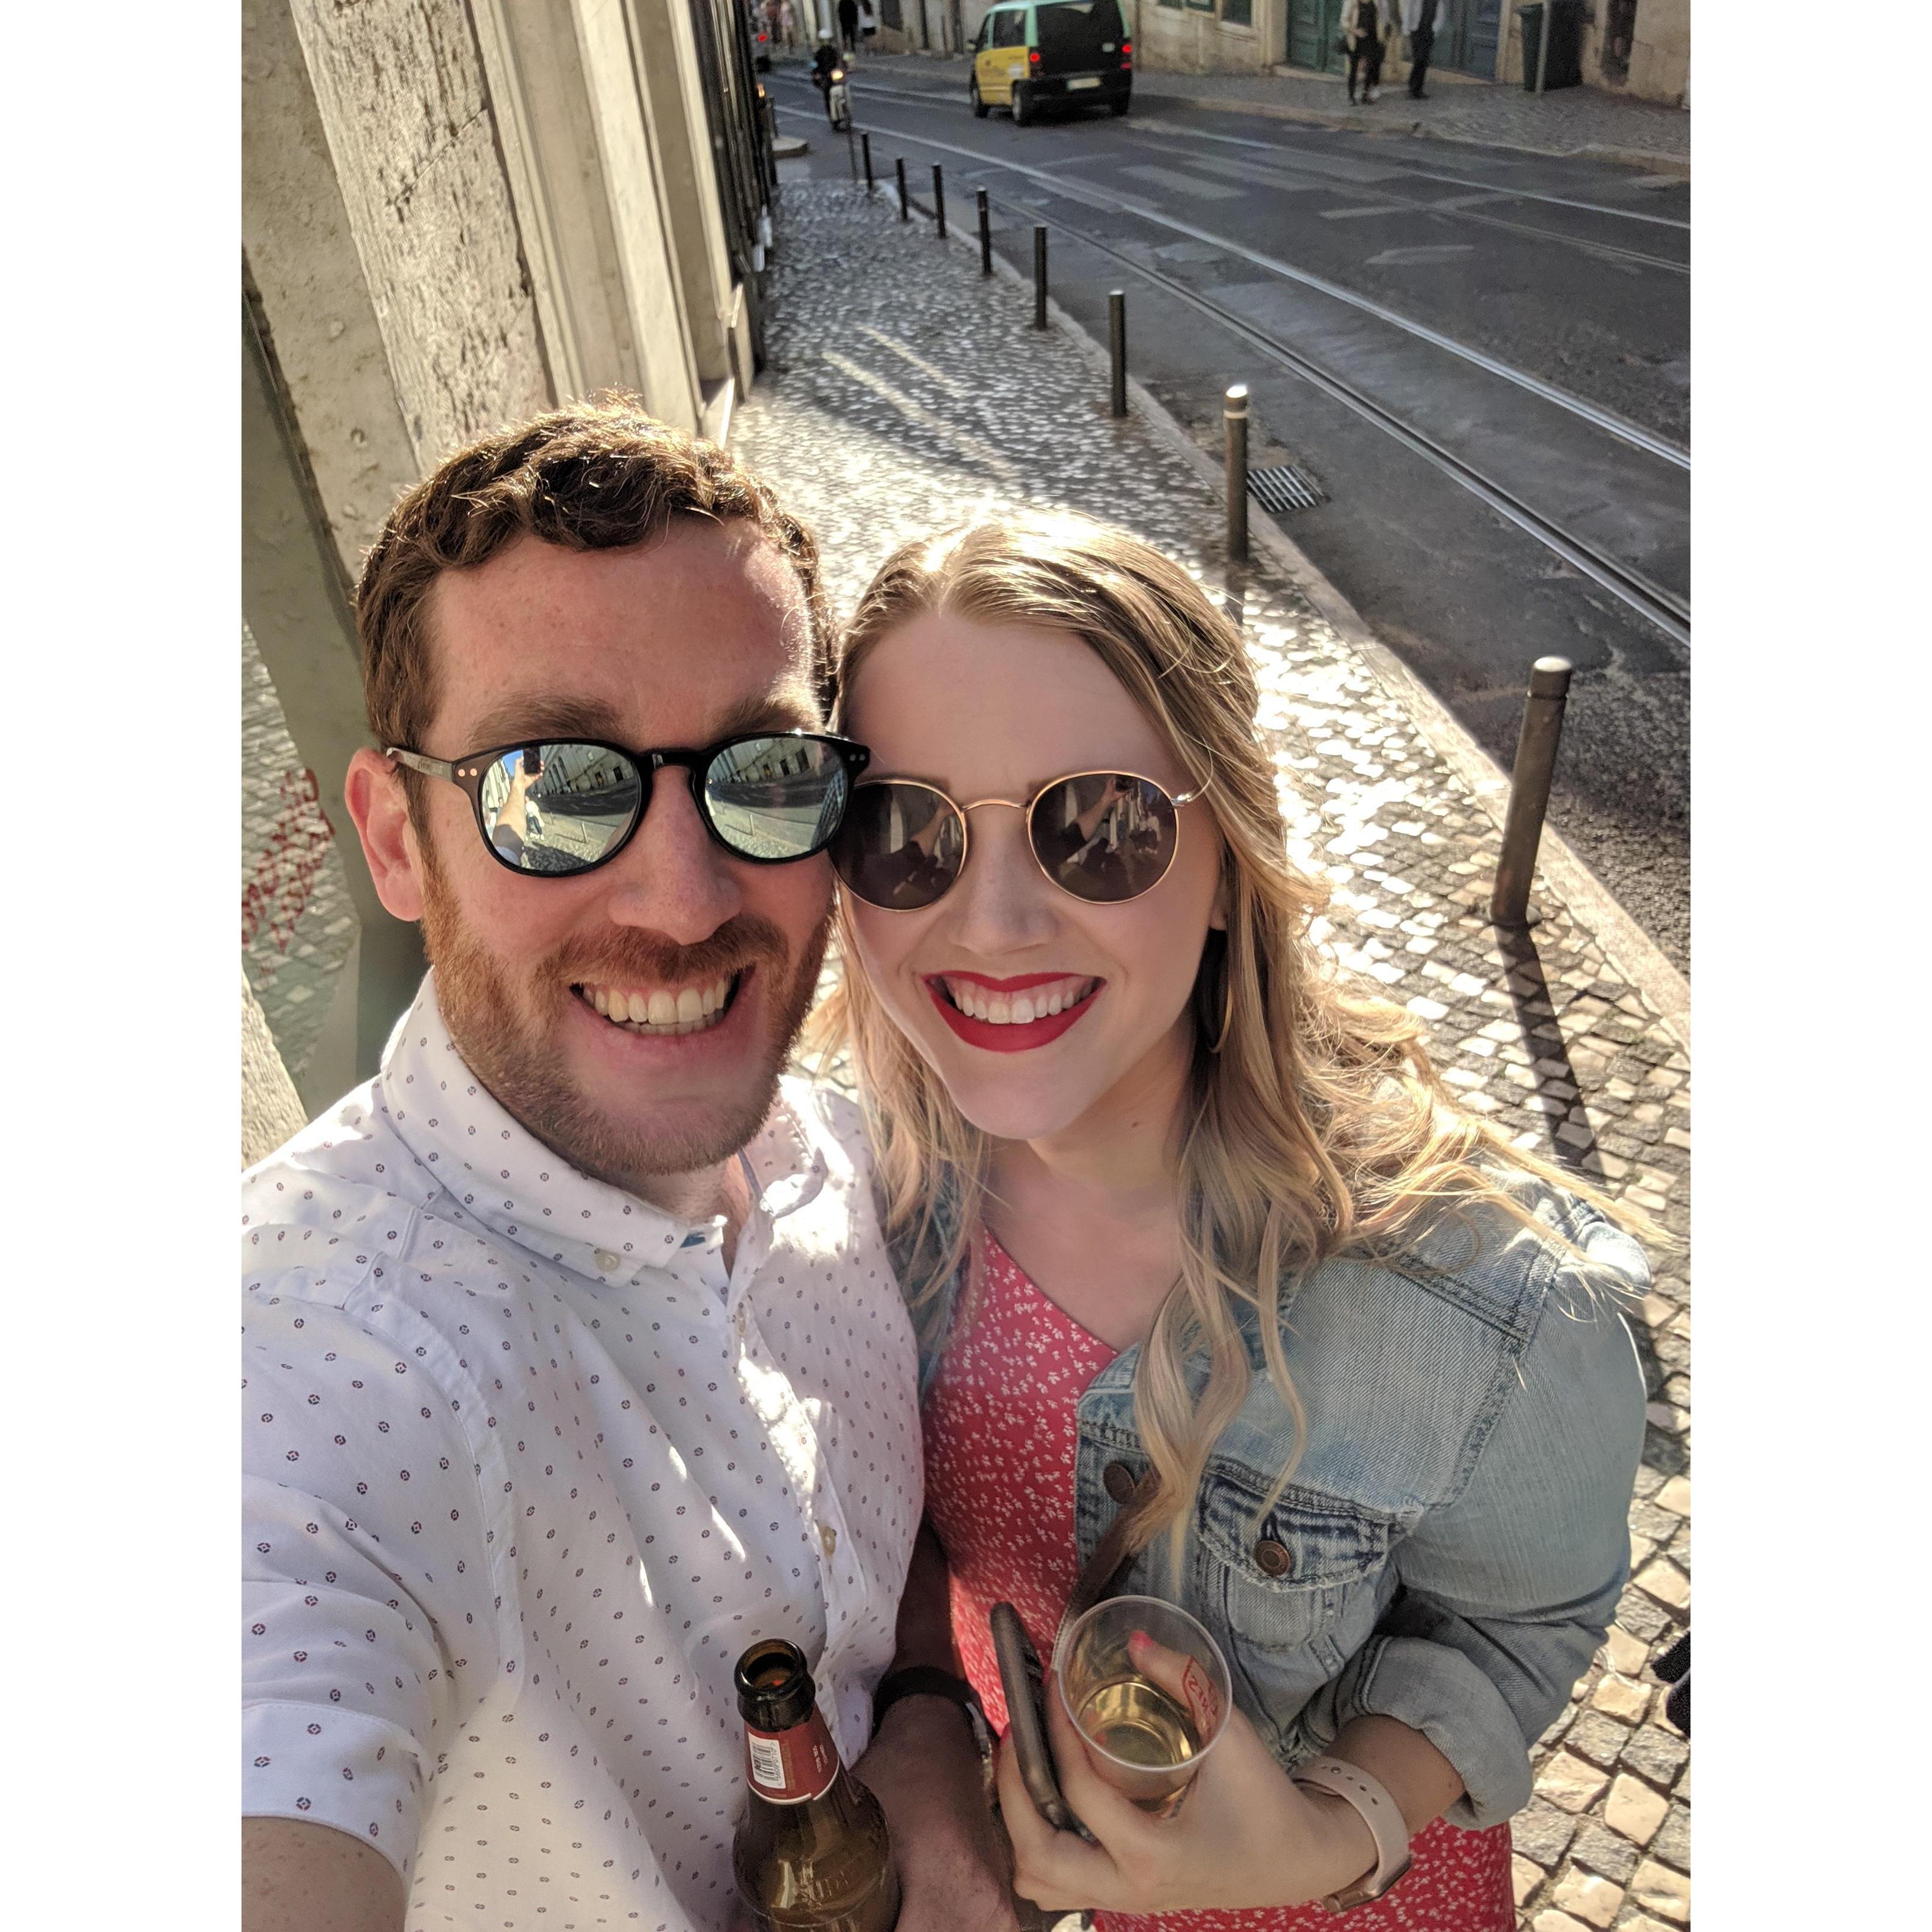 We spent lots of time walking all over Lisbon with our drinks in hand :)